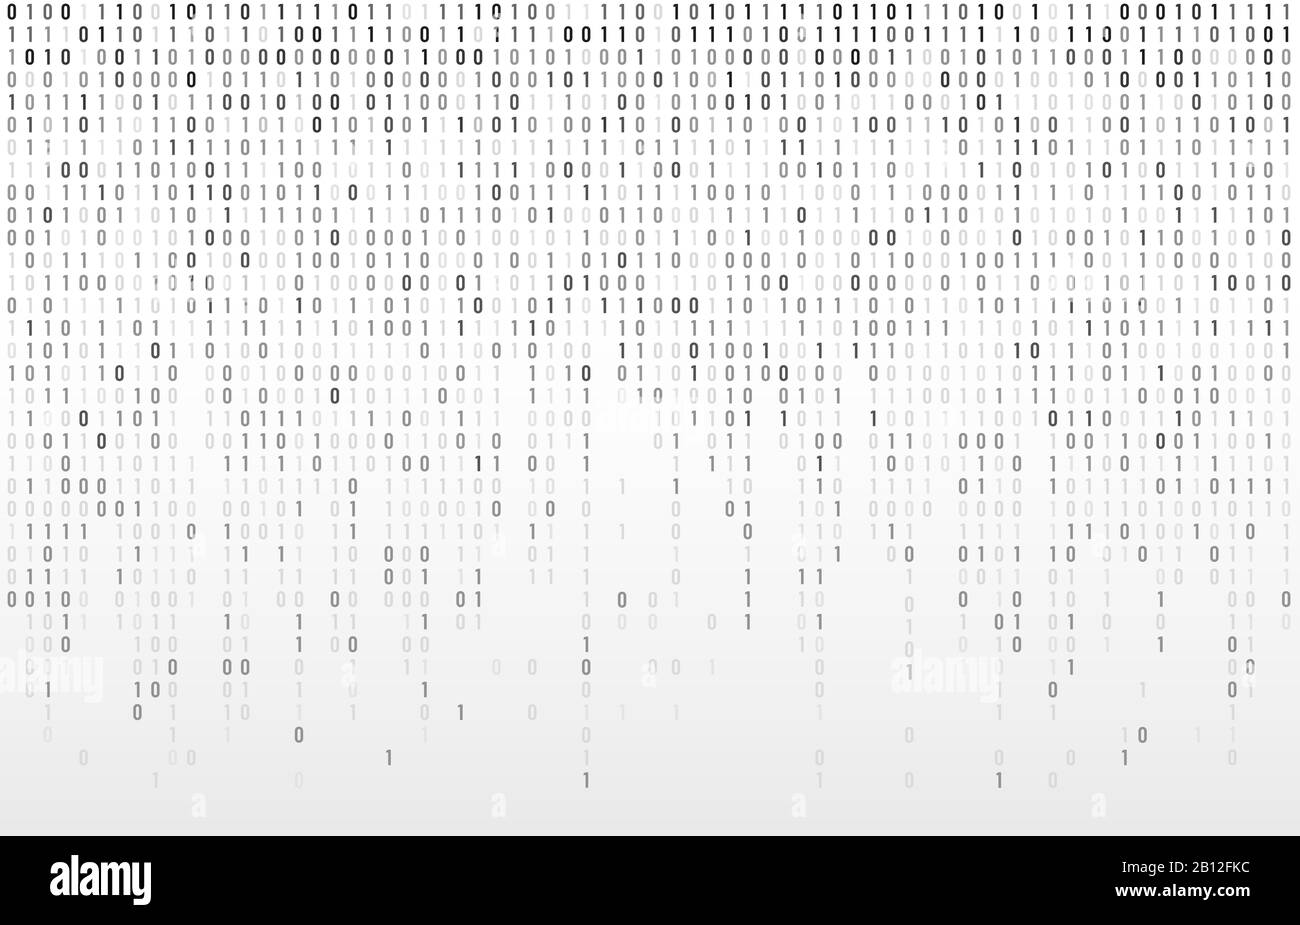 Digital binary code. Computer matrix data falling numbers, coding typography and codes stream gray vector background illustration Stock Vector